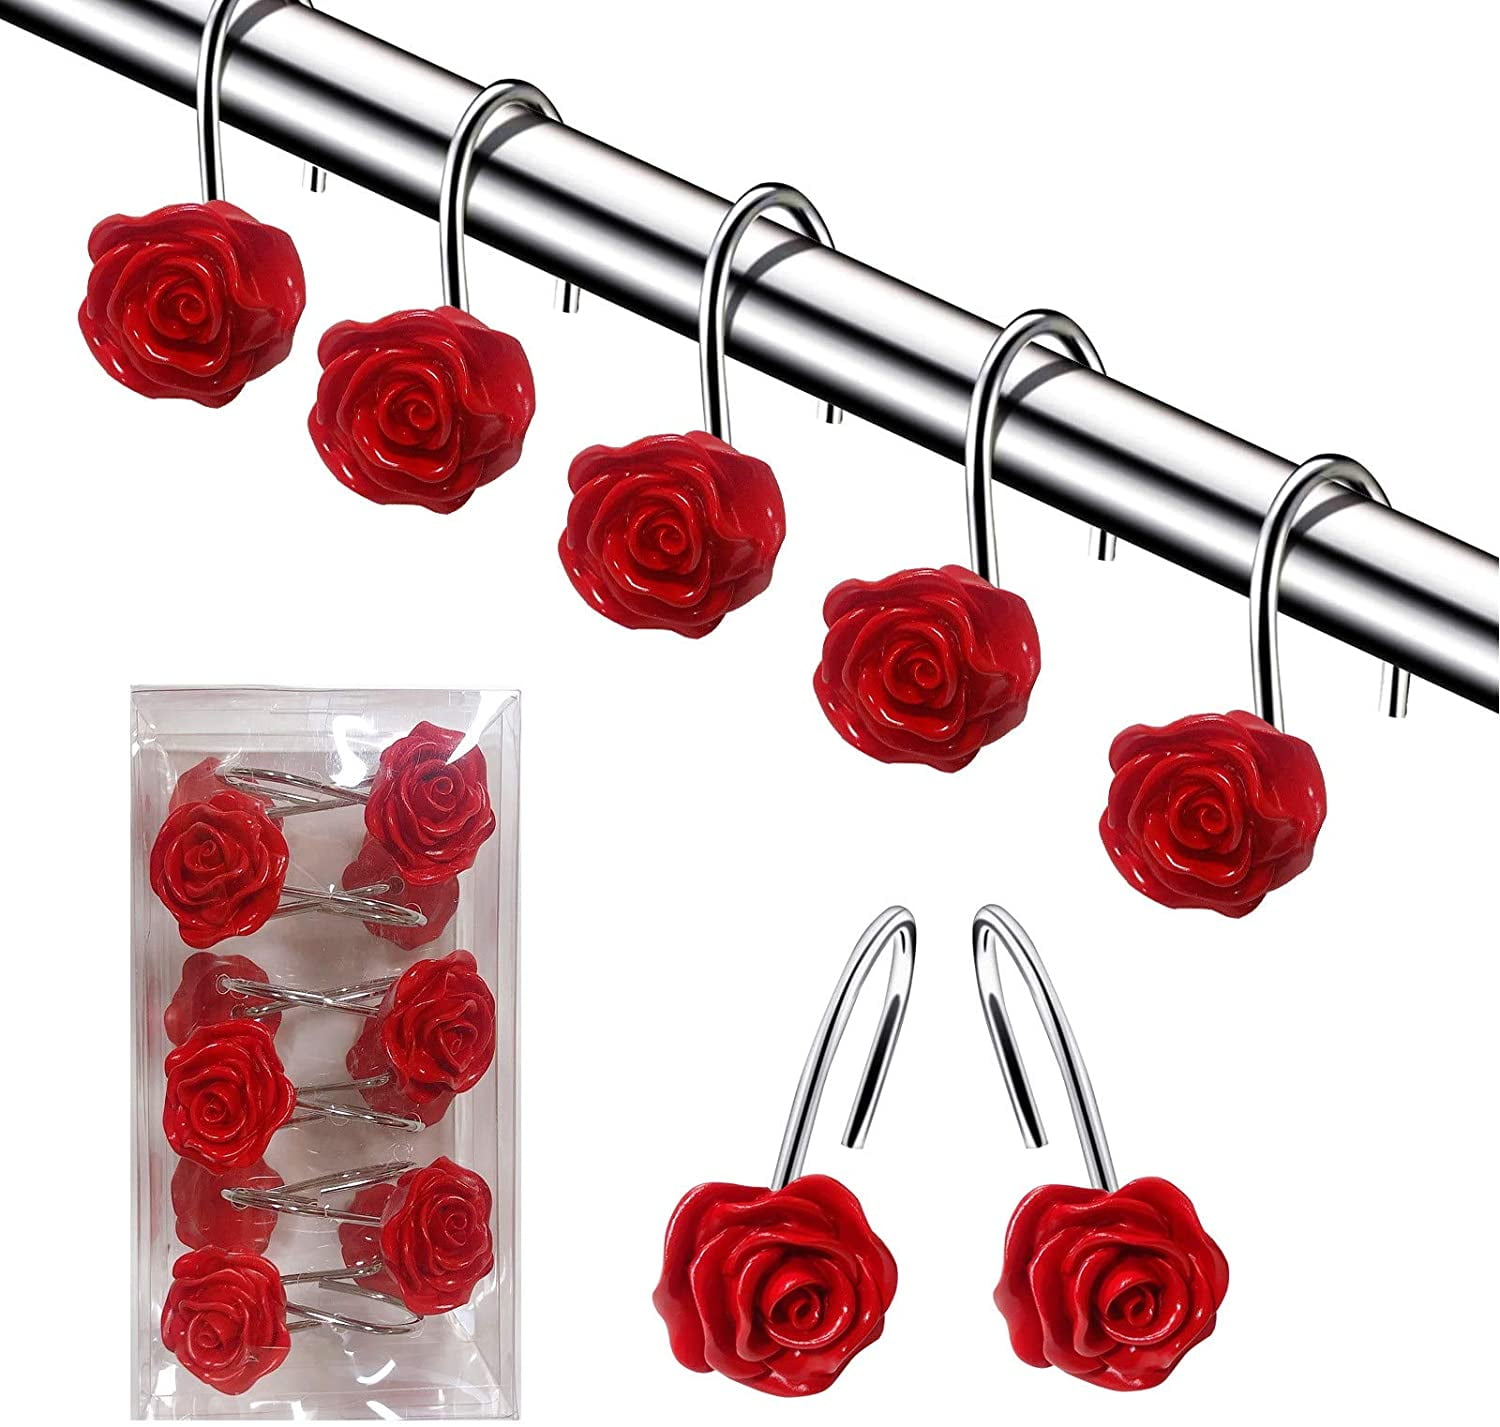 Details about   12x Shower Curtain Hook Anti Rust Resin Blossome Flowers Leaves Home Decorative 